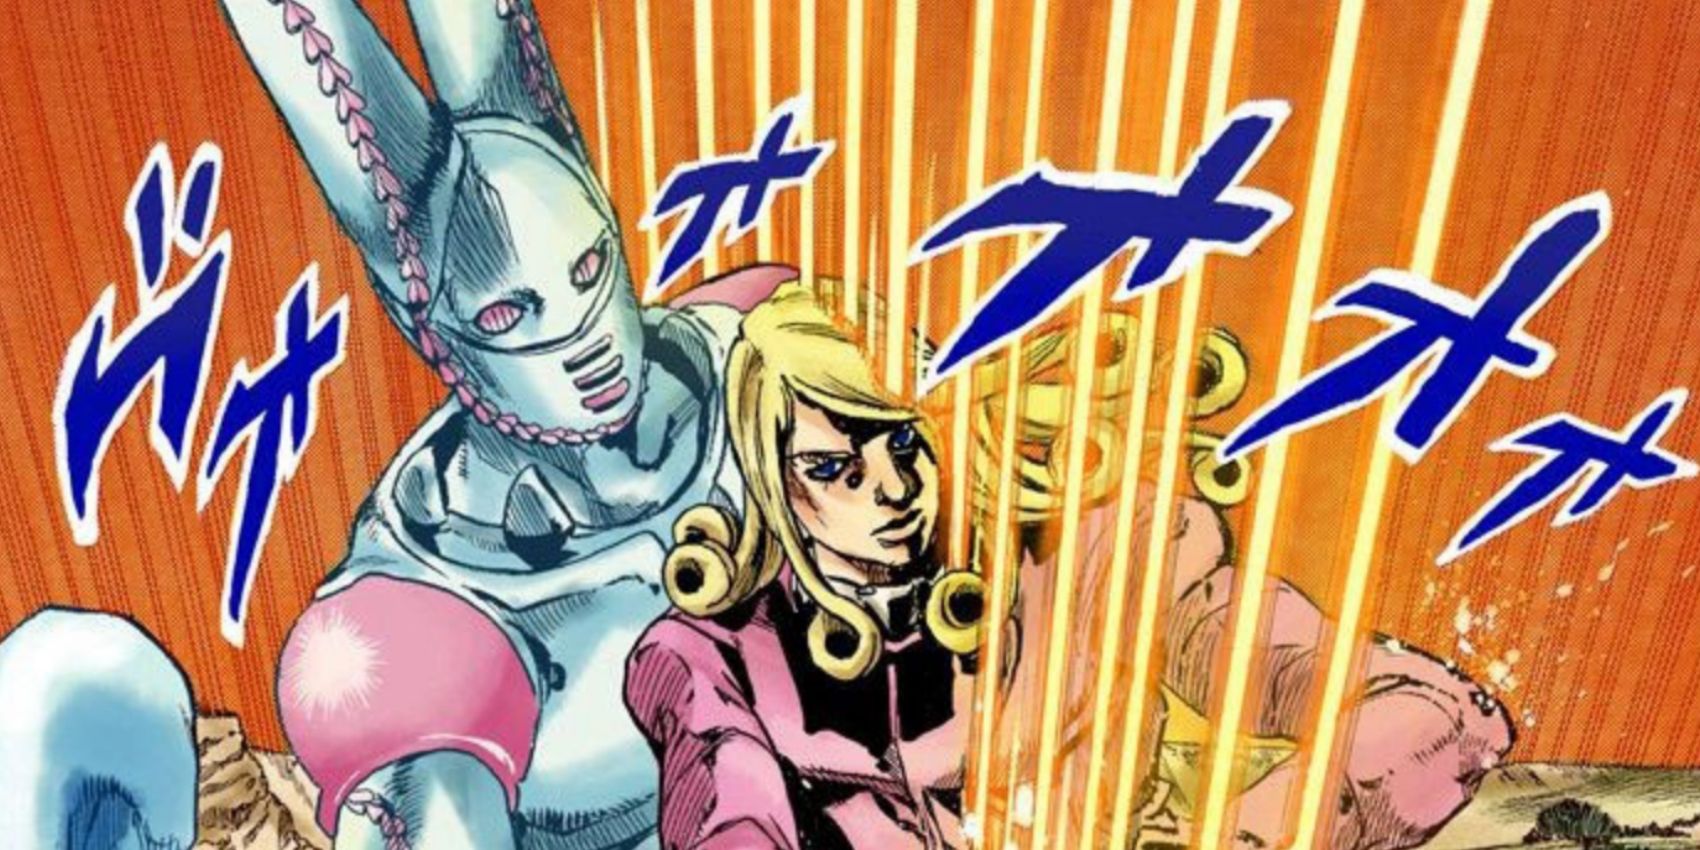 D4C and Funny Valentine